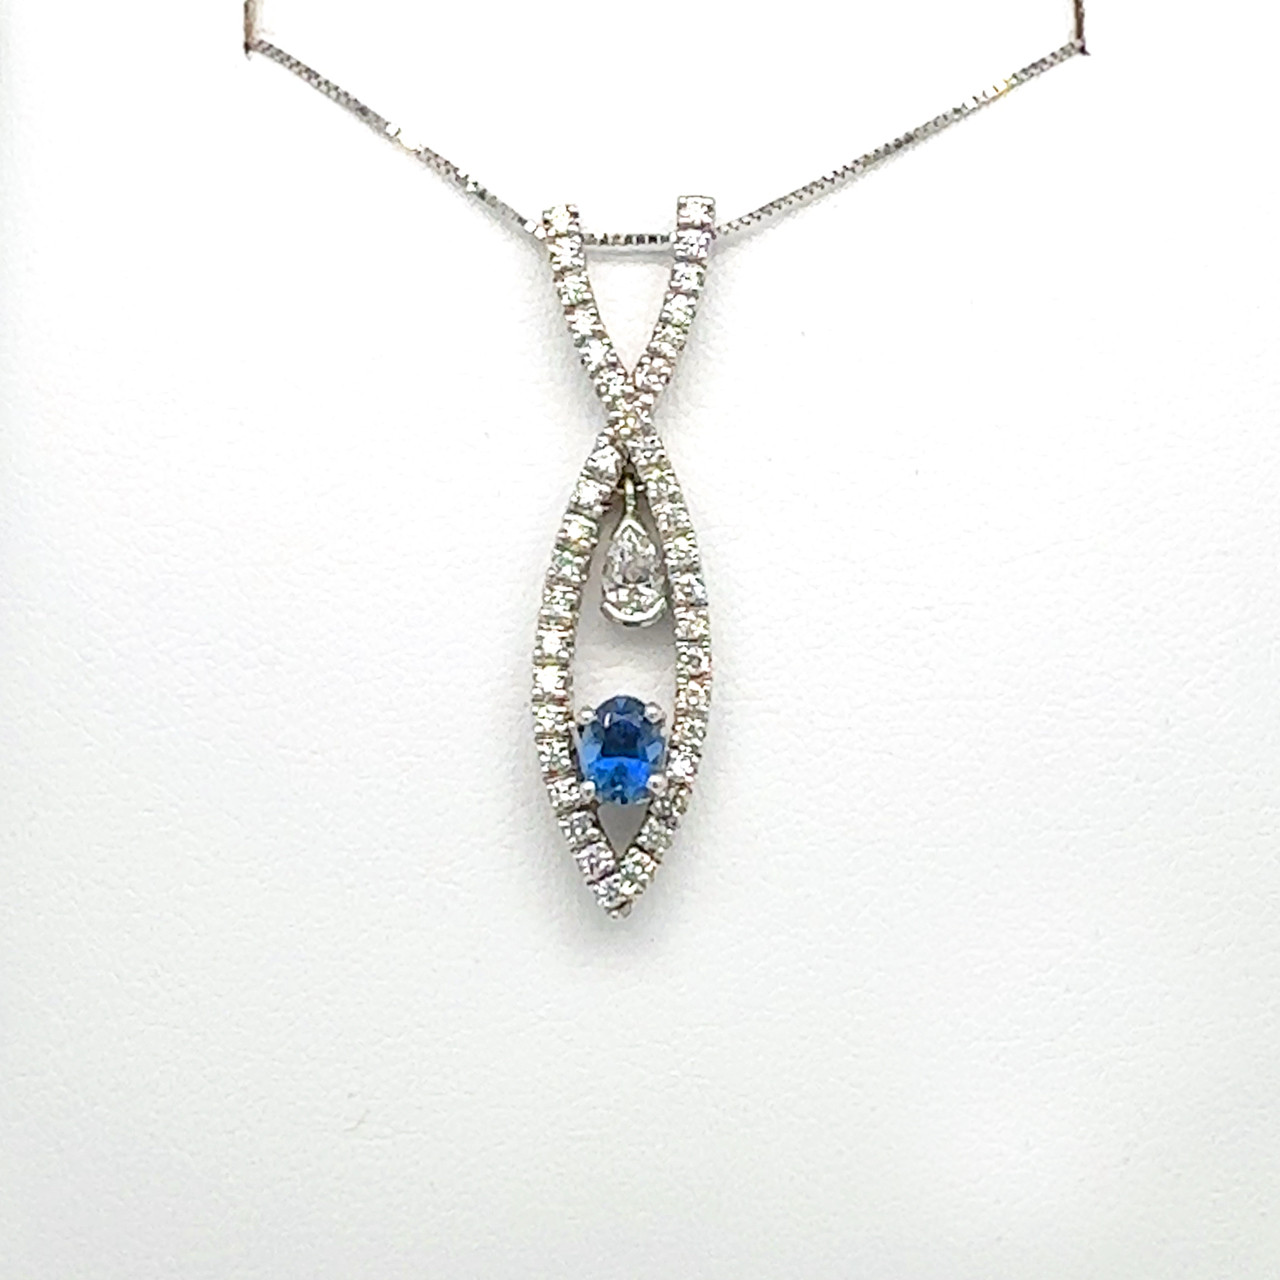 Sapphire & Diamond Pendant Necklace in 9ct White Gold | Ruby & Oscar